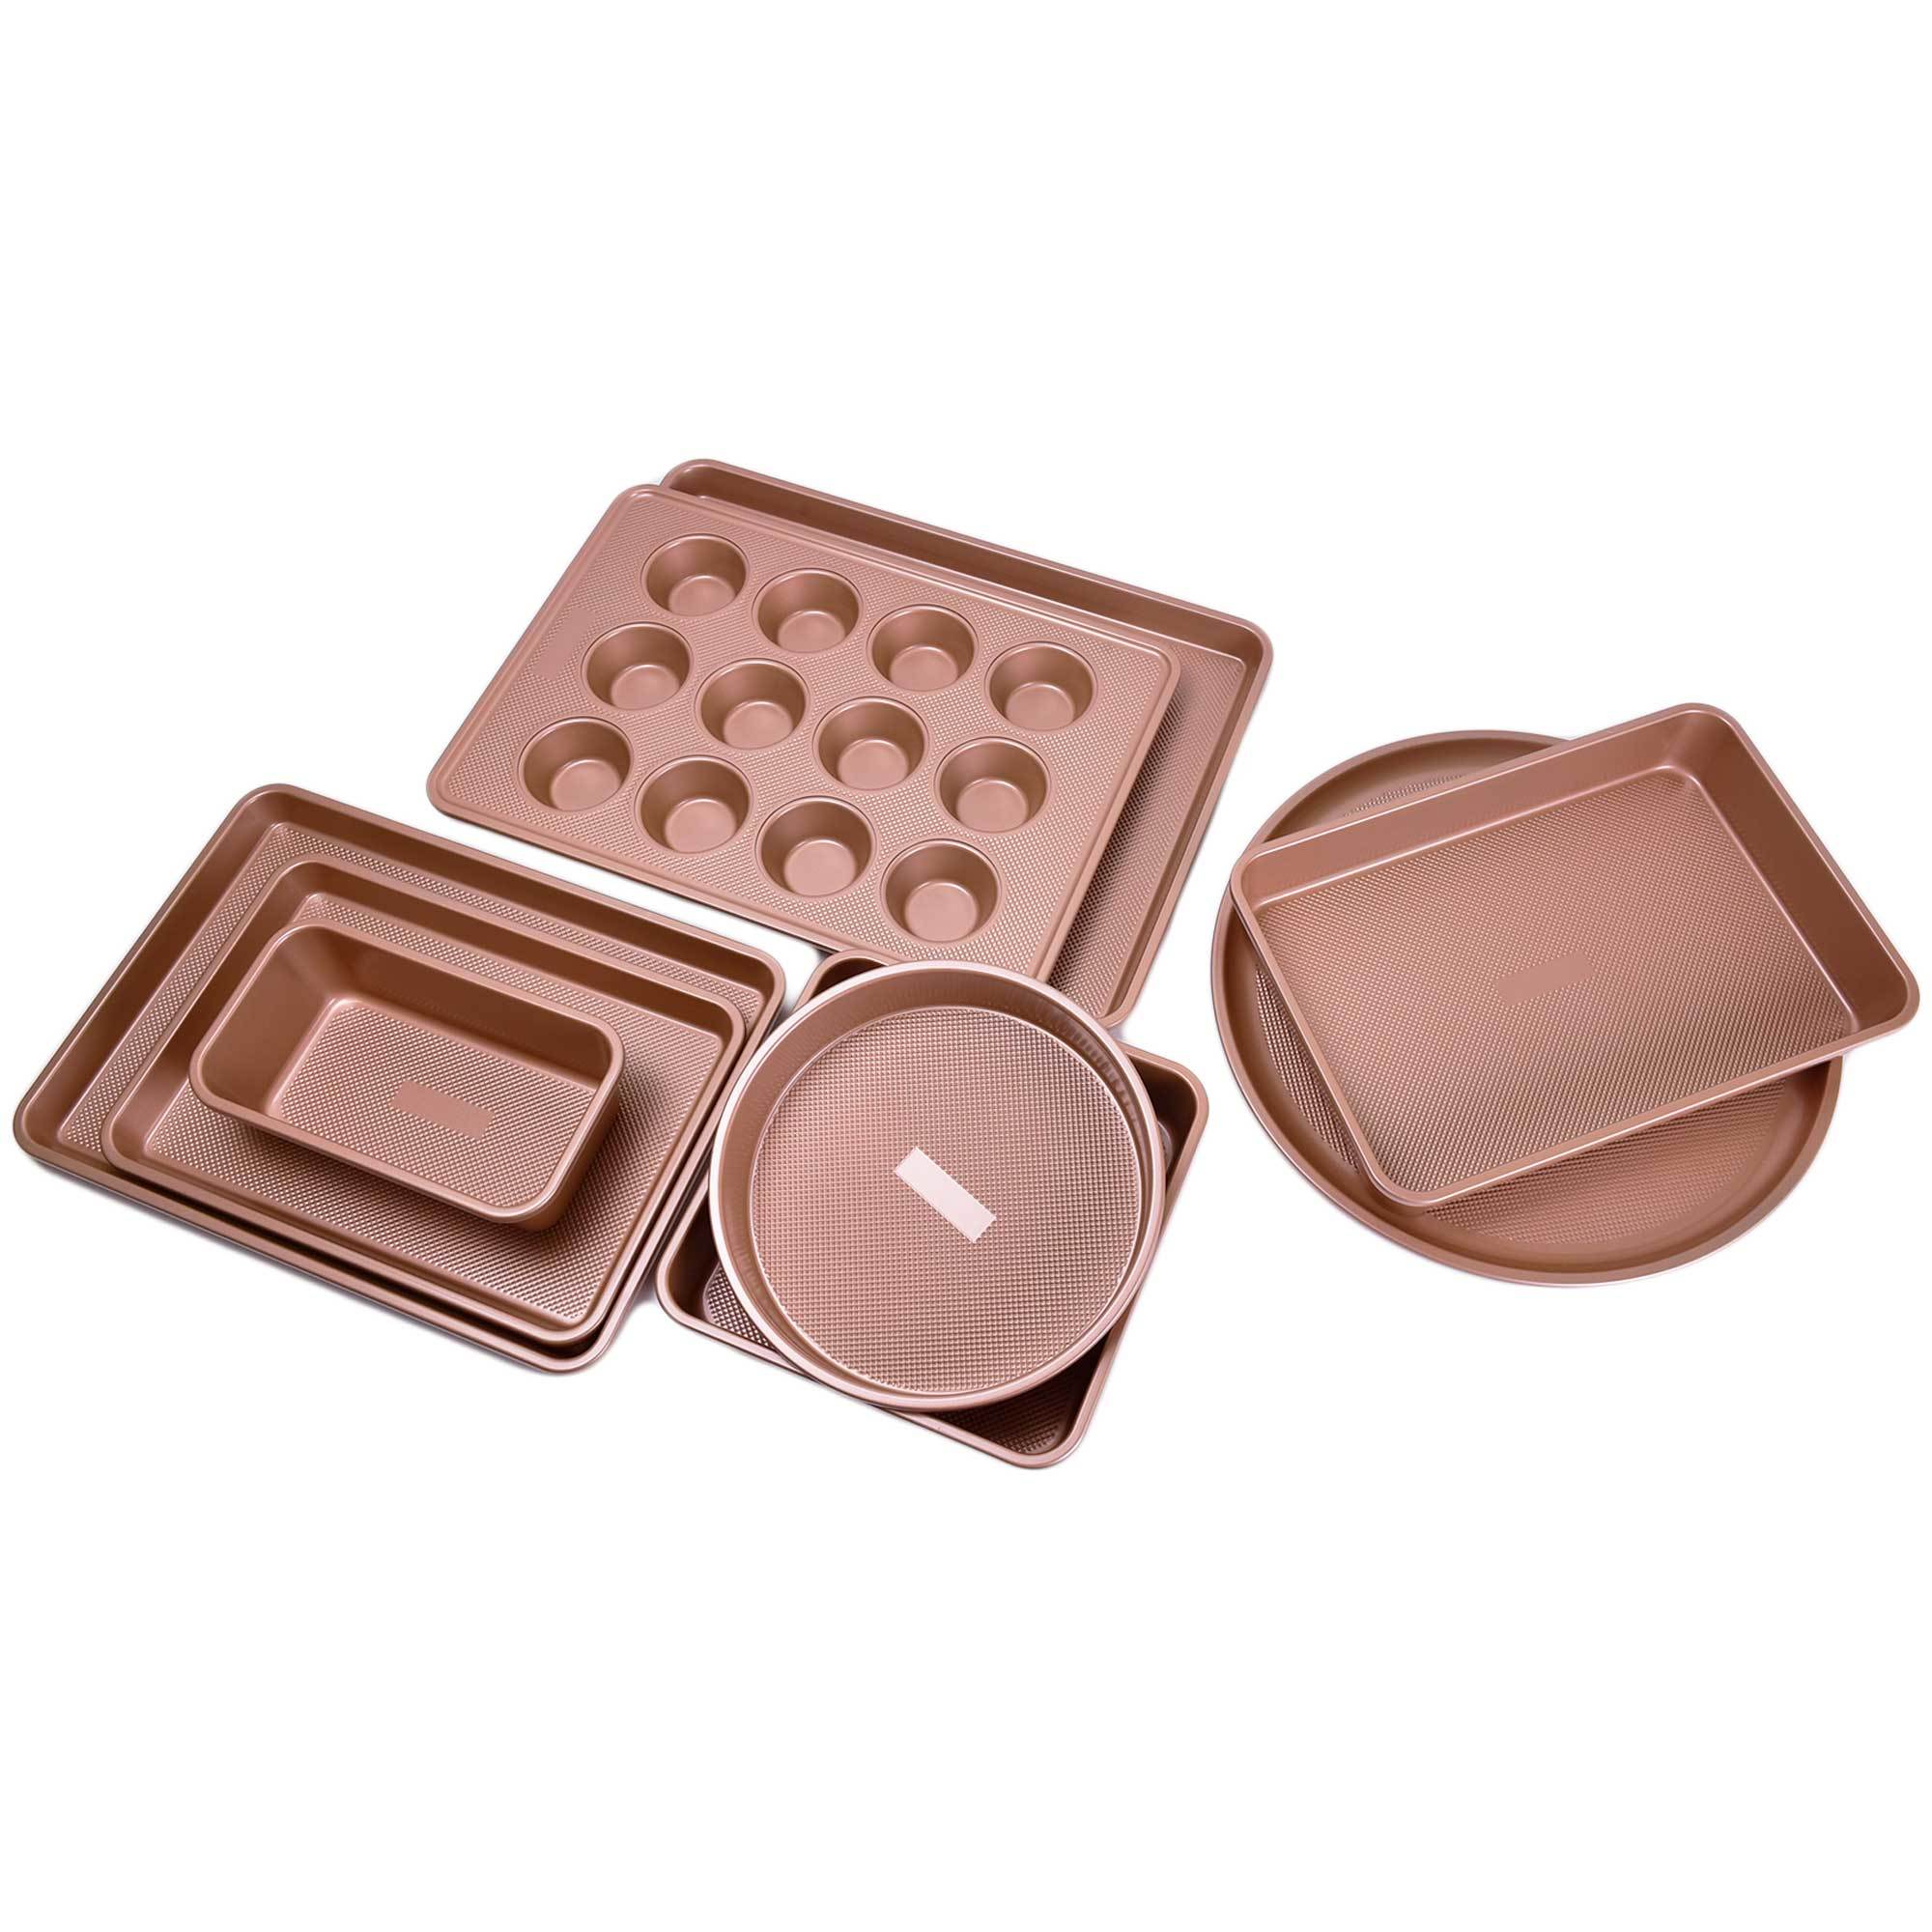 Bakeware Set with Texture Pattern 3232